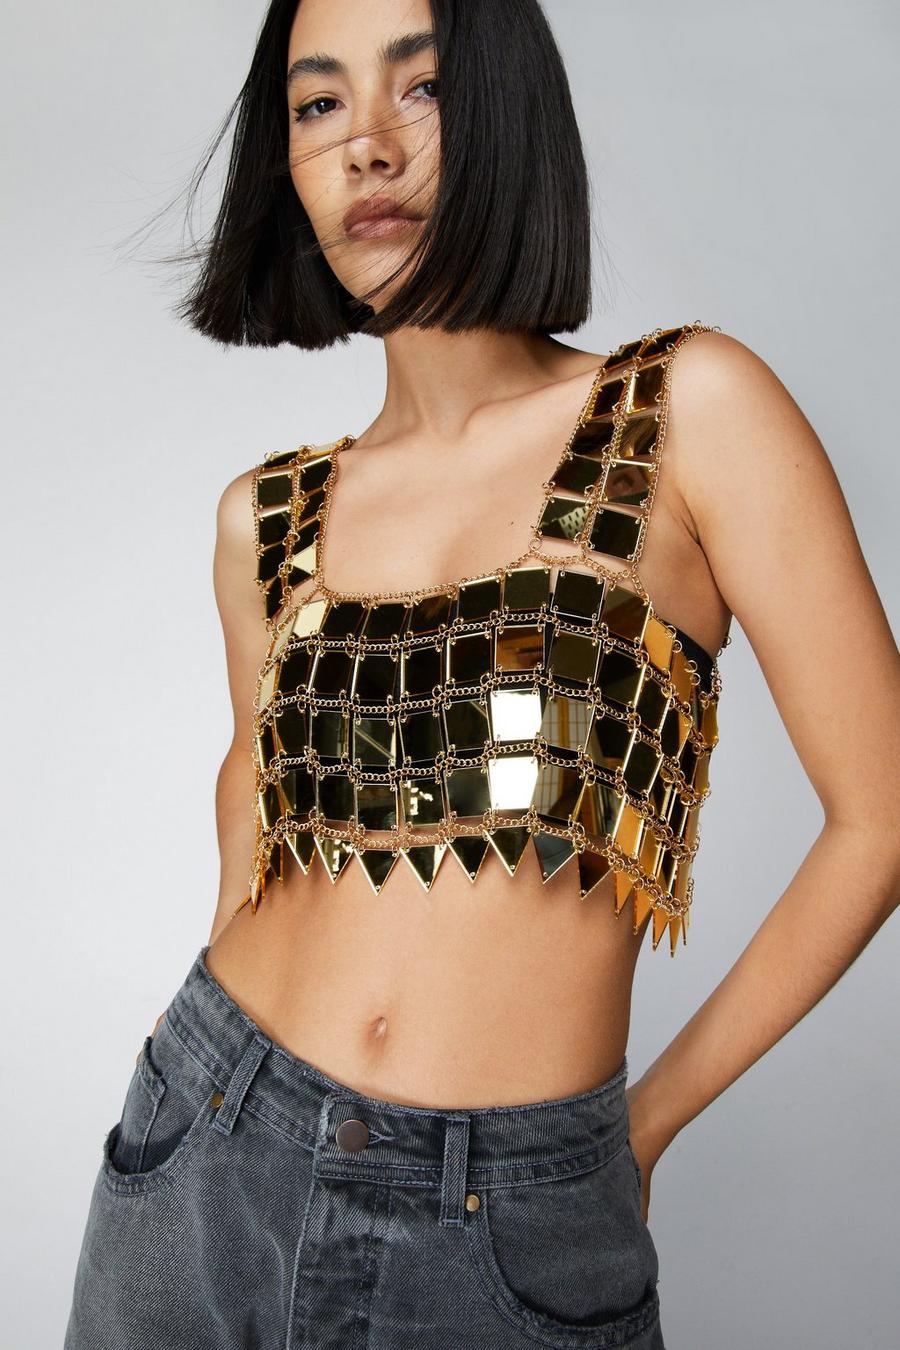 Gold chainmail top - #fashion #inspo #gold #outfit #chainmail #top #glam